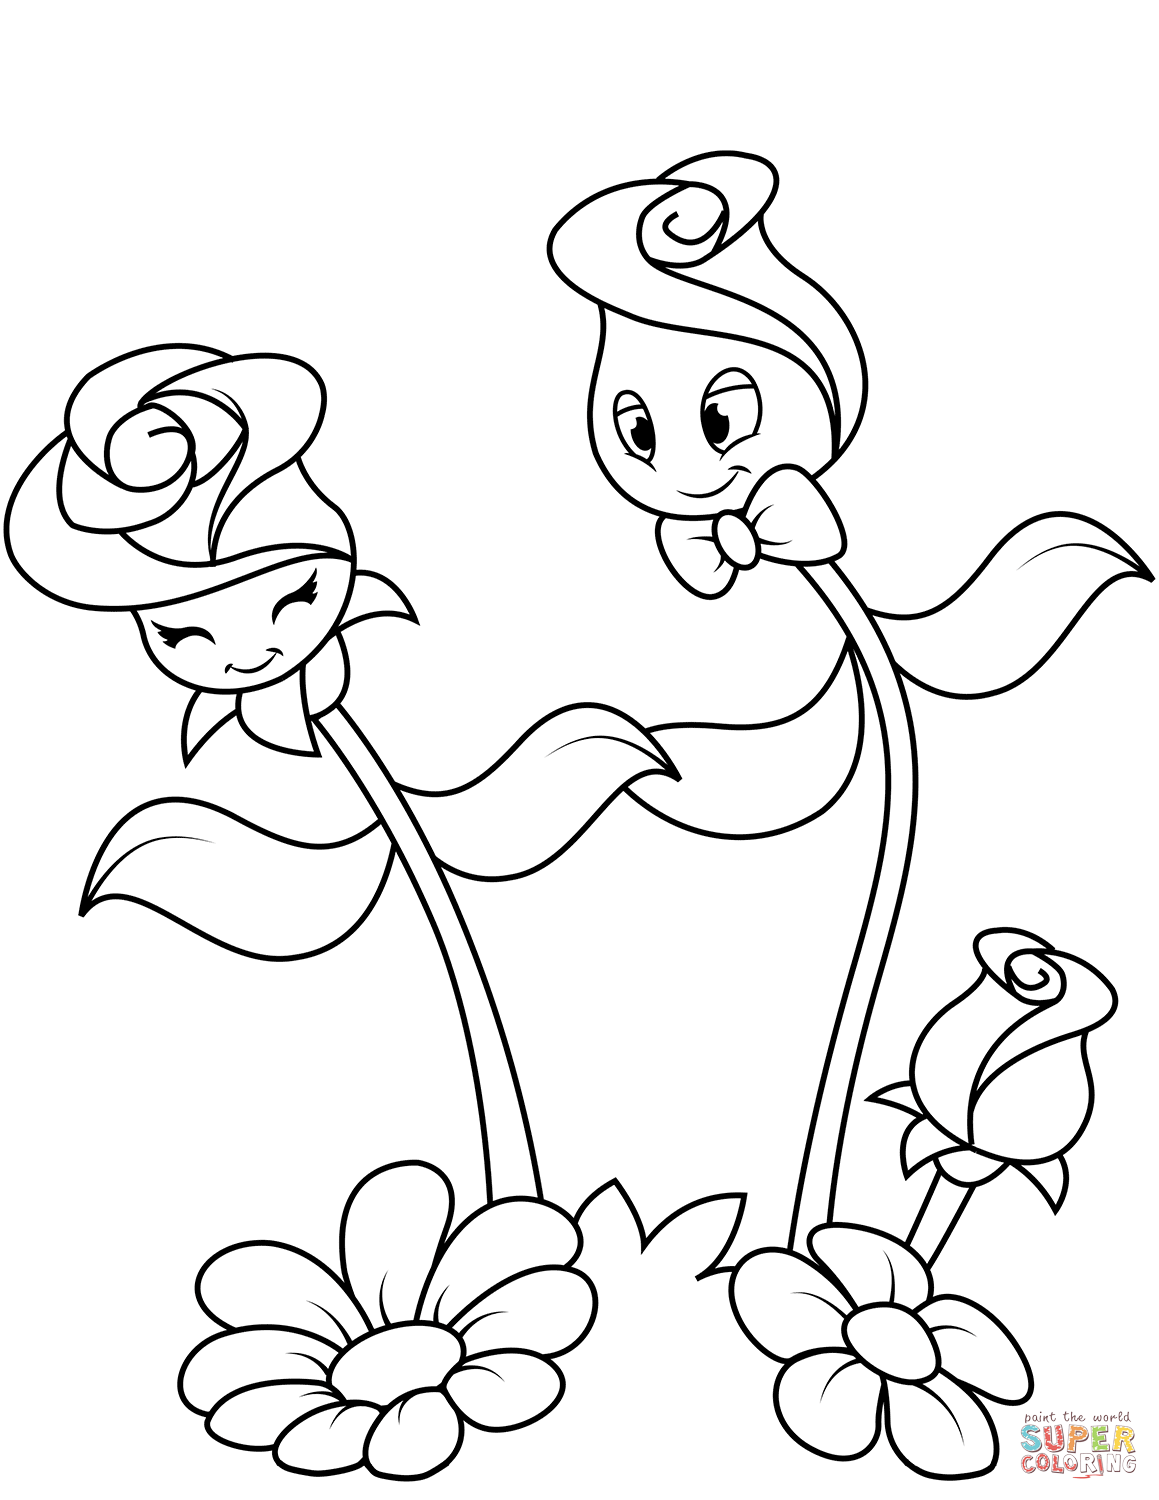 Cute Roses Characters Coloring Pages